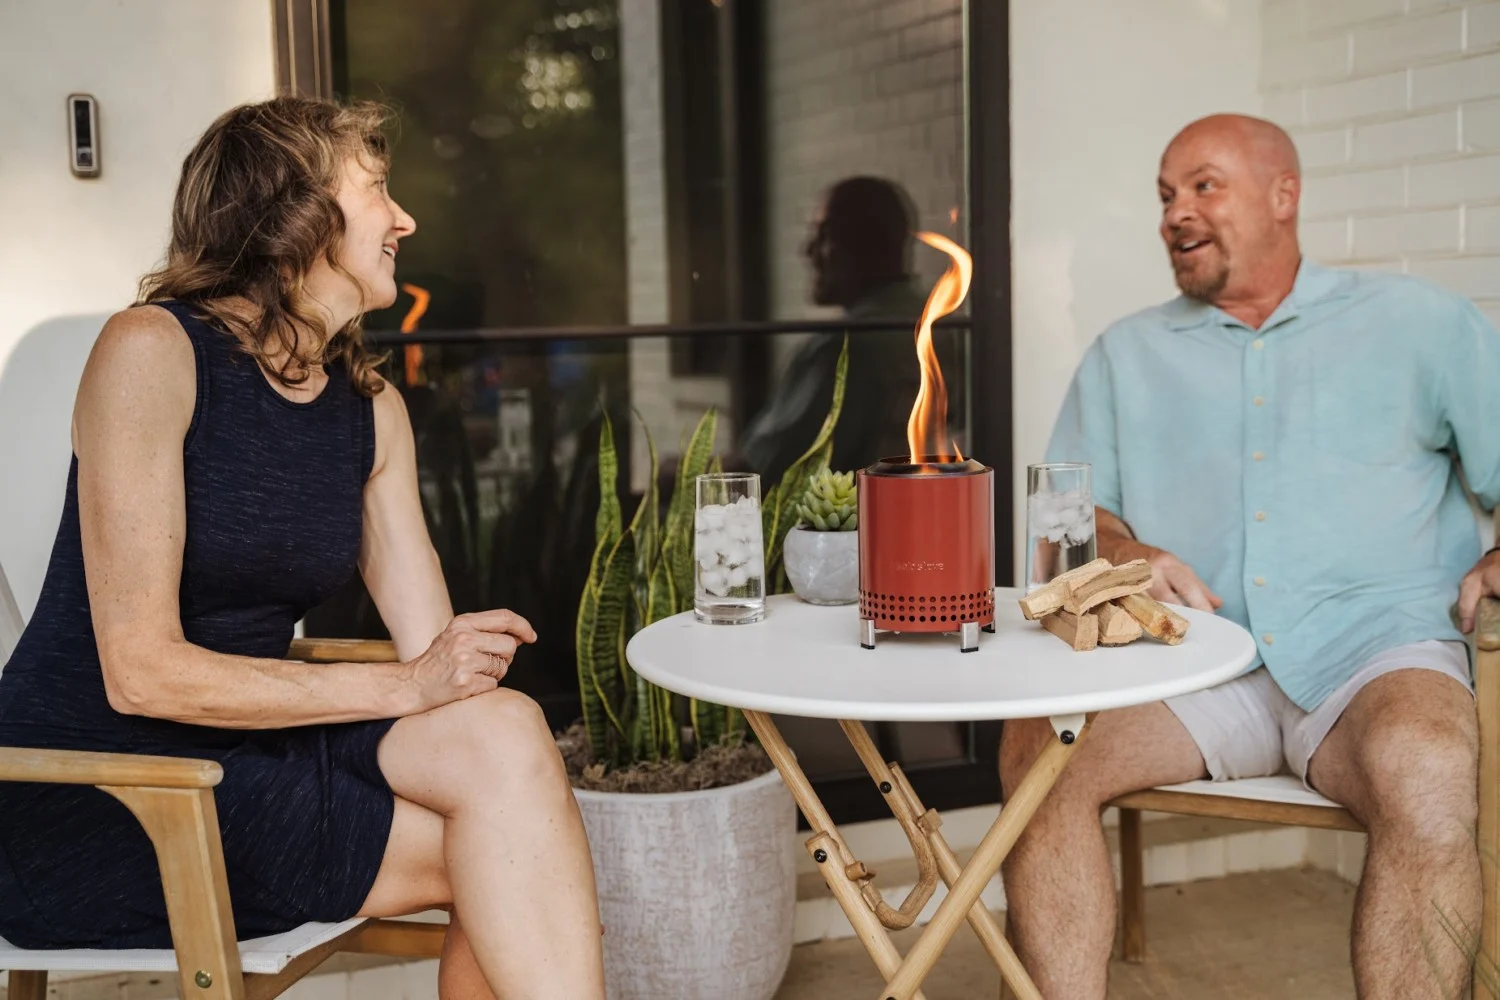 This New Tabletop Fire Pit Burns Wood And Lets You Make S’mores At Your Patio Table